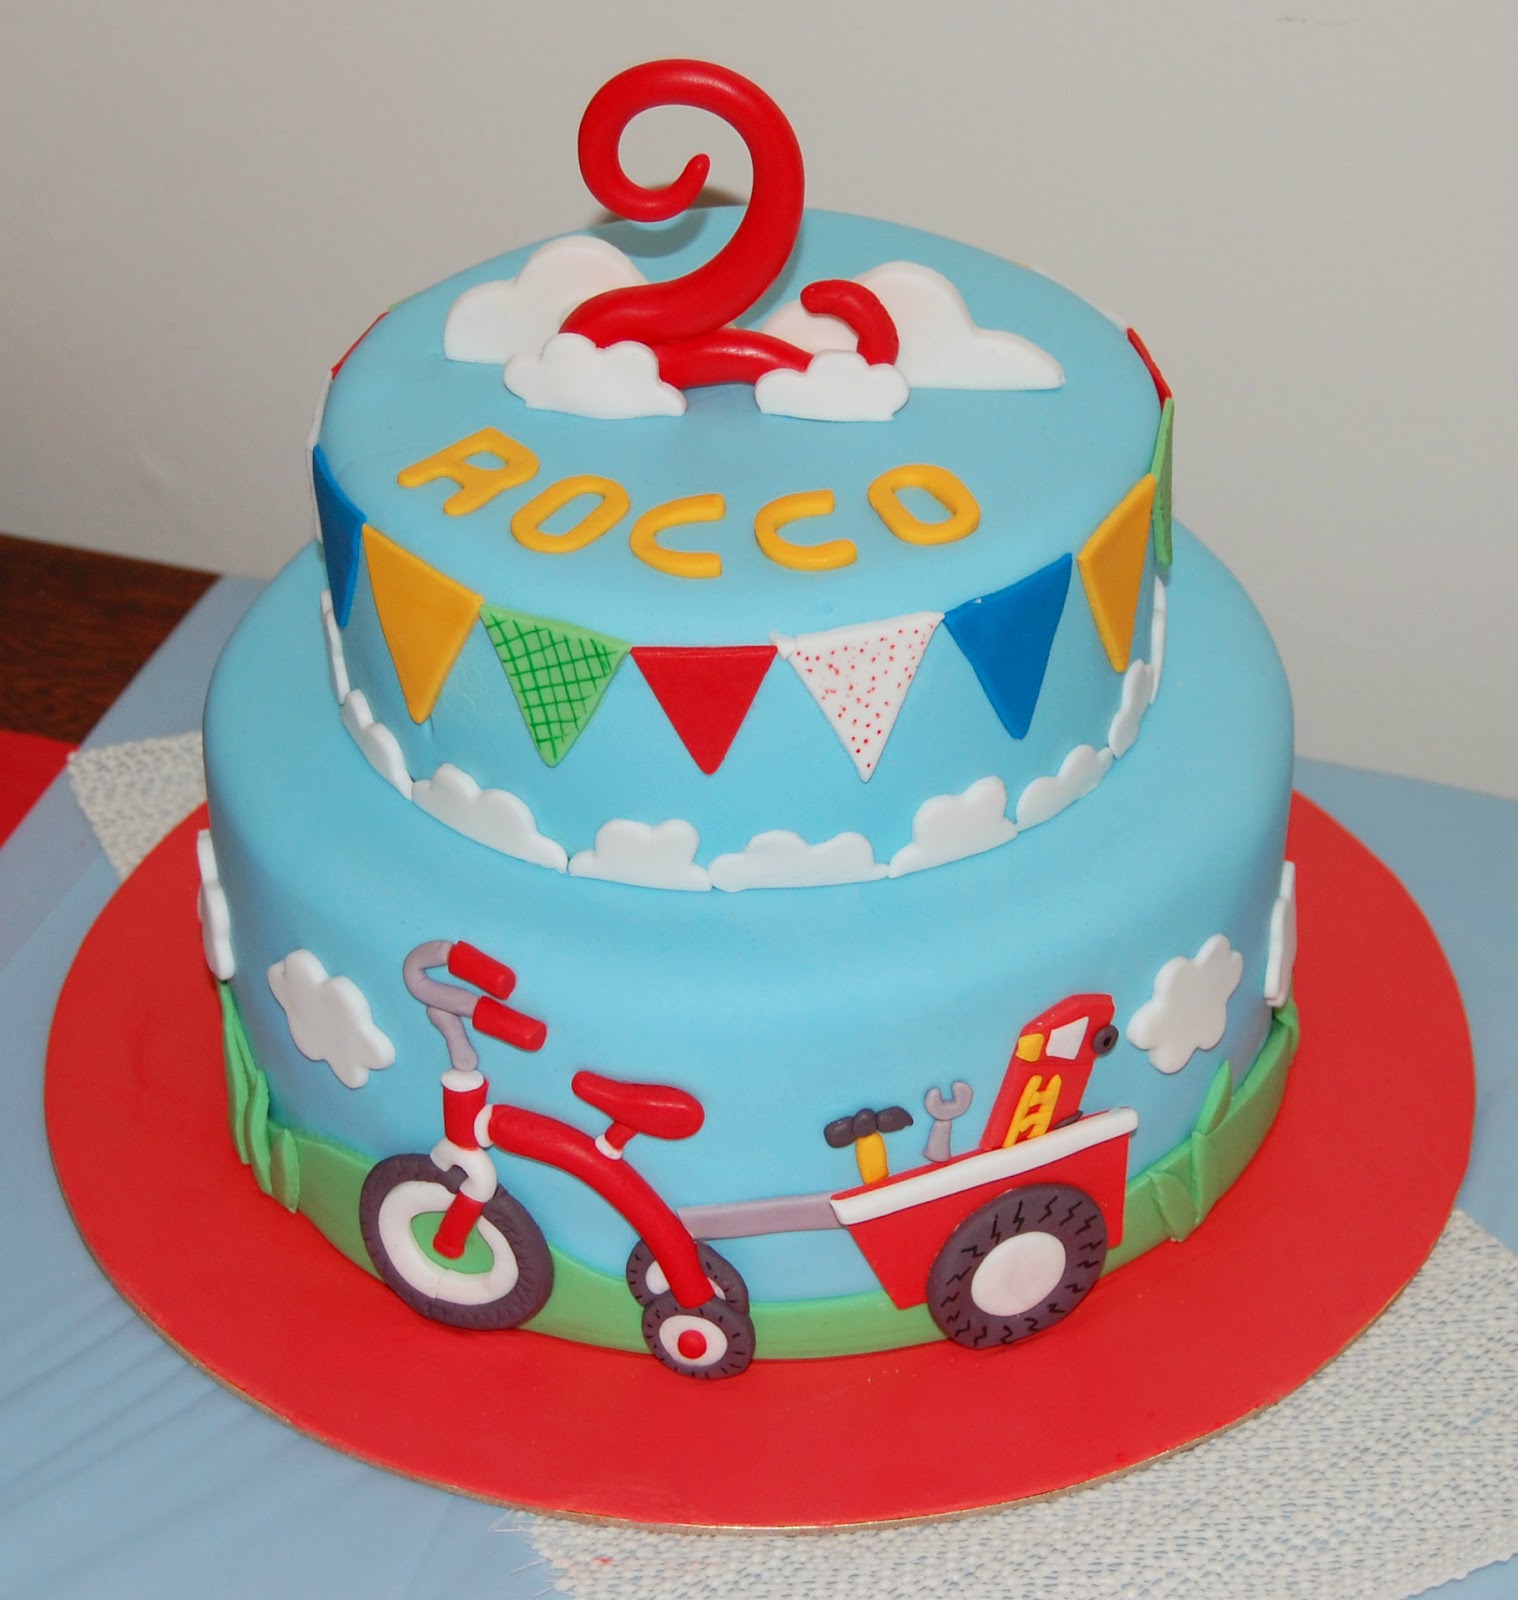 Birthday Cakes Ideas For 2 Year Old - Cake Ideas